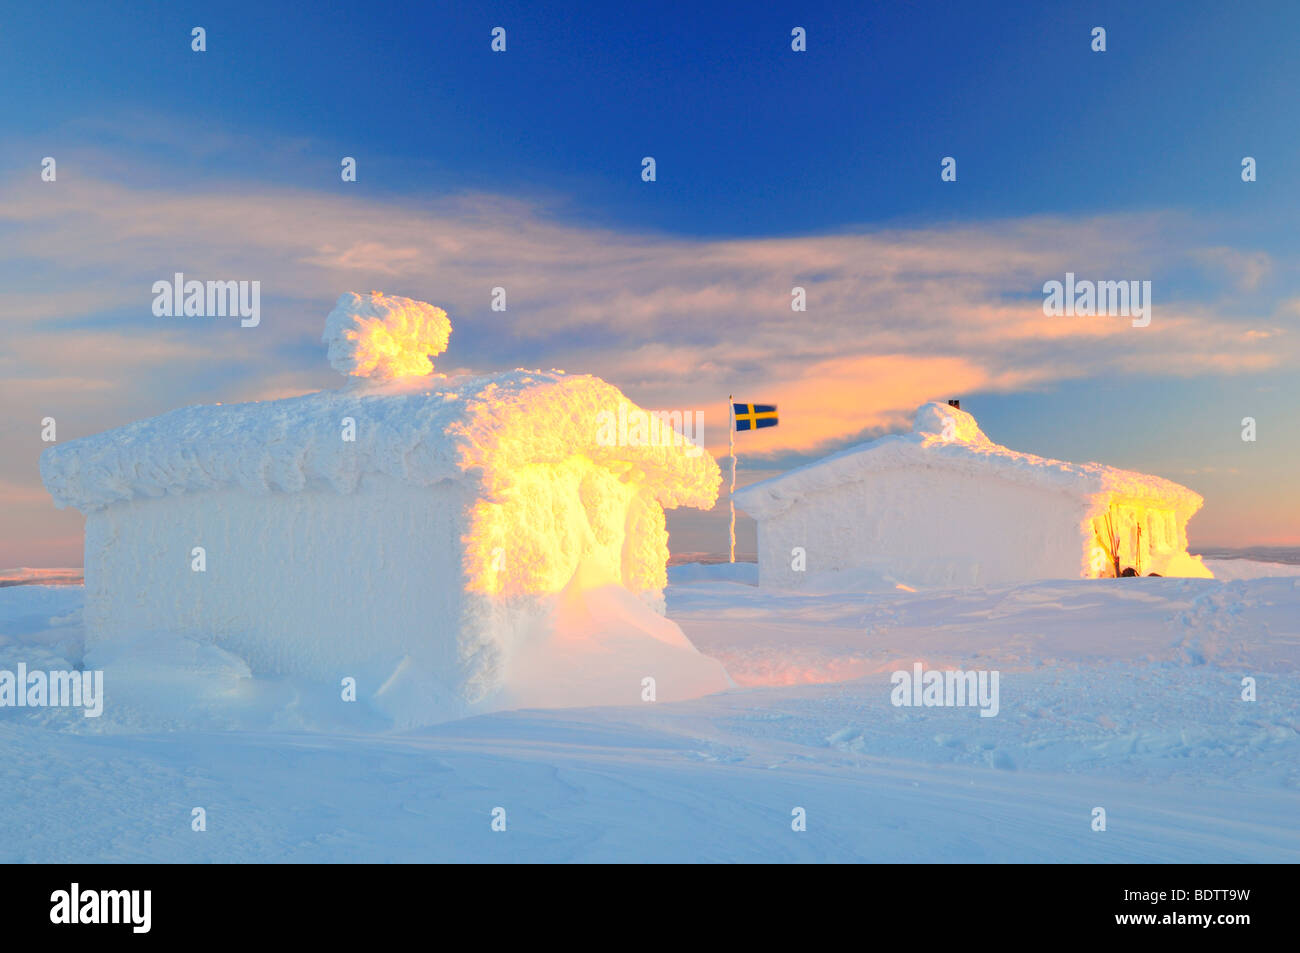 snowbound huts on mount dundret in swedish lapland Stock Photo